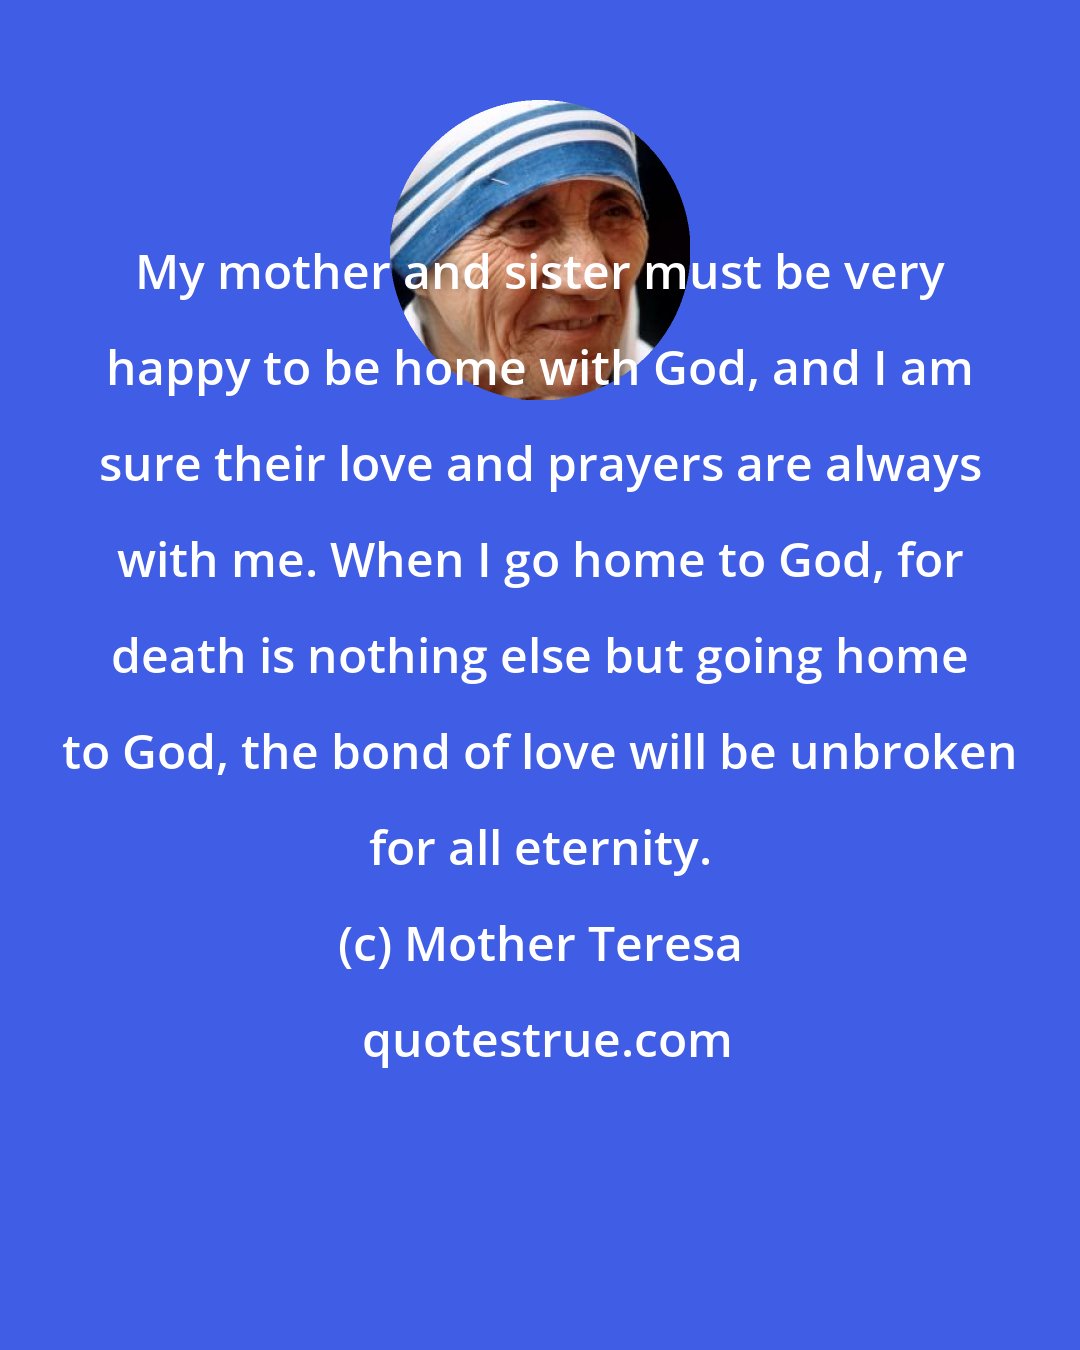 Mother Teresa: My mother and sister must be very happy to be home with God, and I am sure their love and prayers are always with me. When I go home to God, for death is nothing else but going home to God, the bond of love will be unbroken for all eternity.